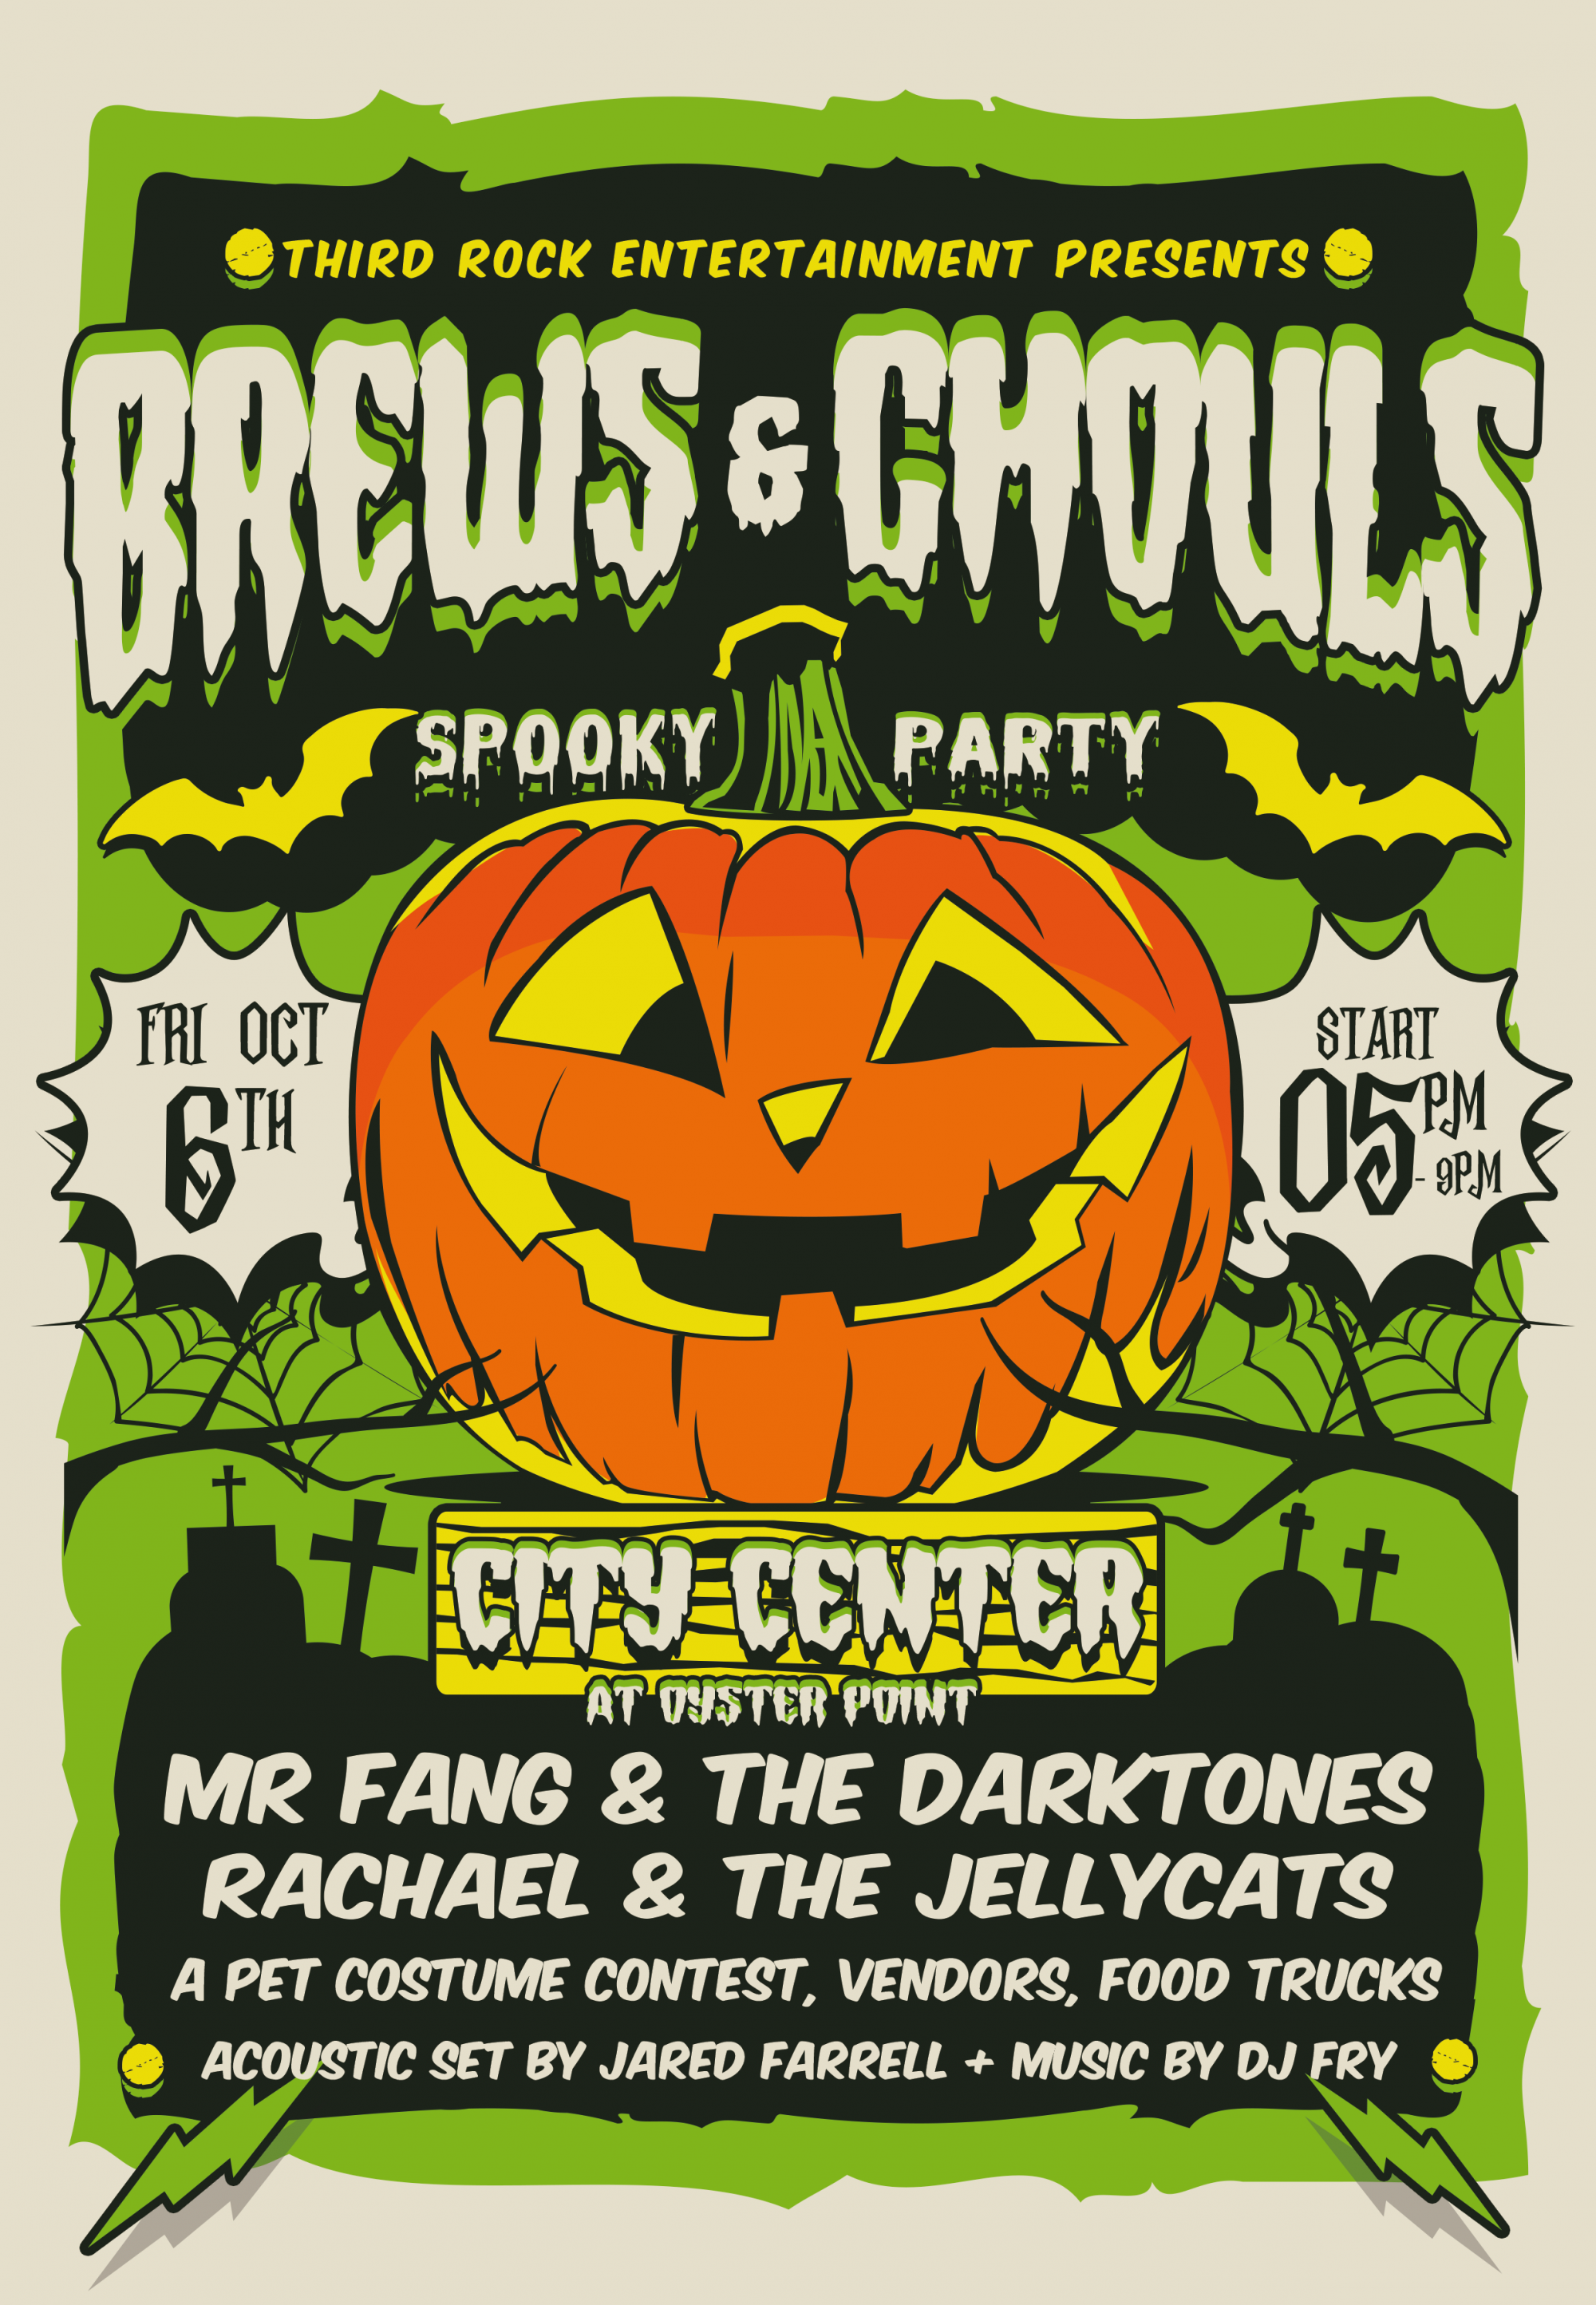 Brews & Ghouls Spooky Party